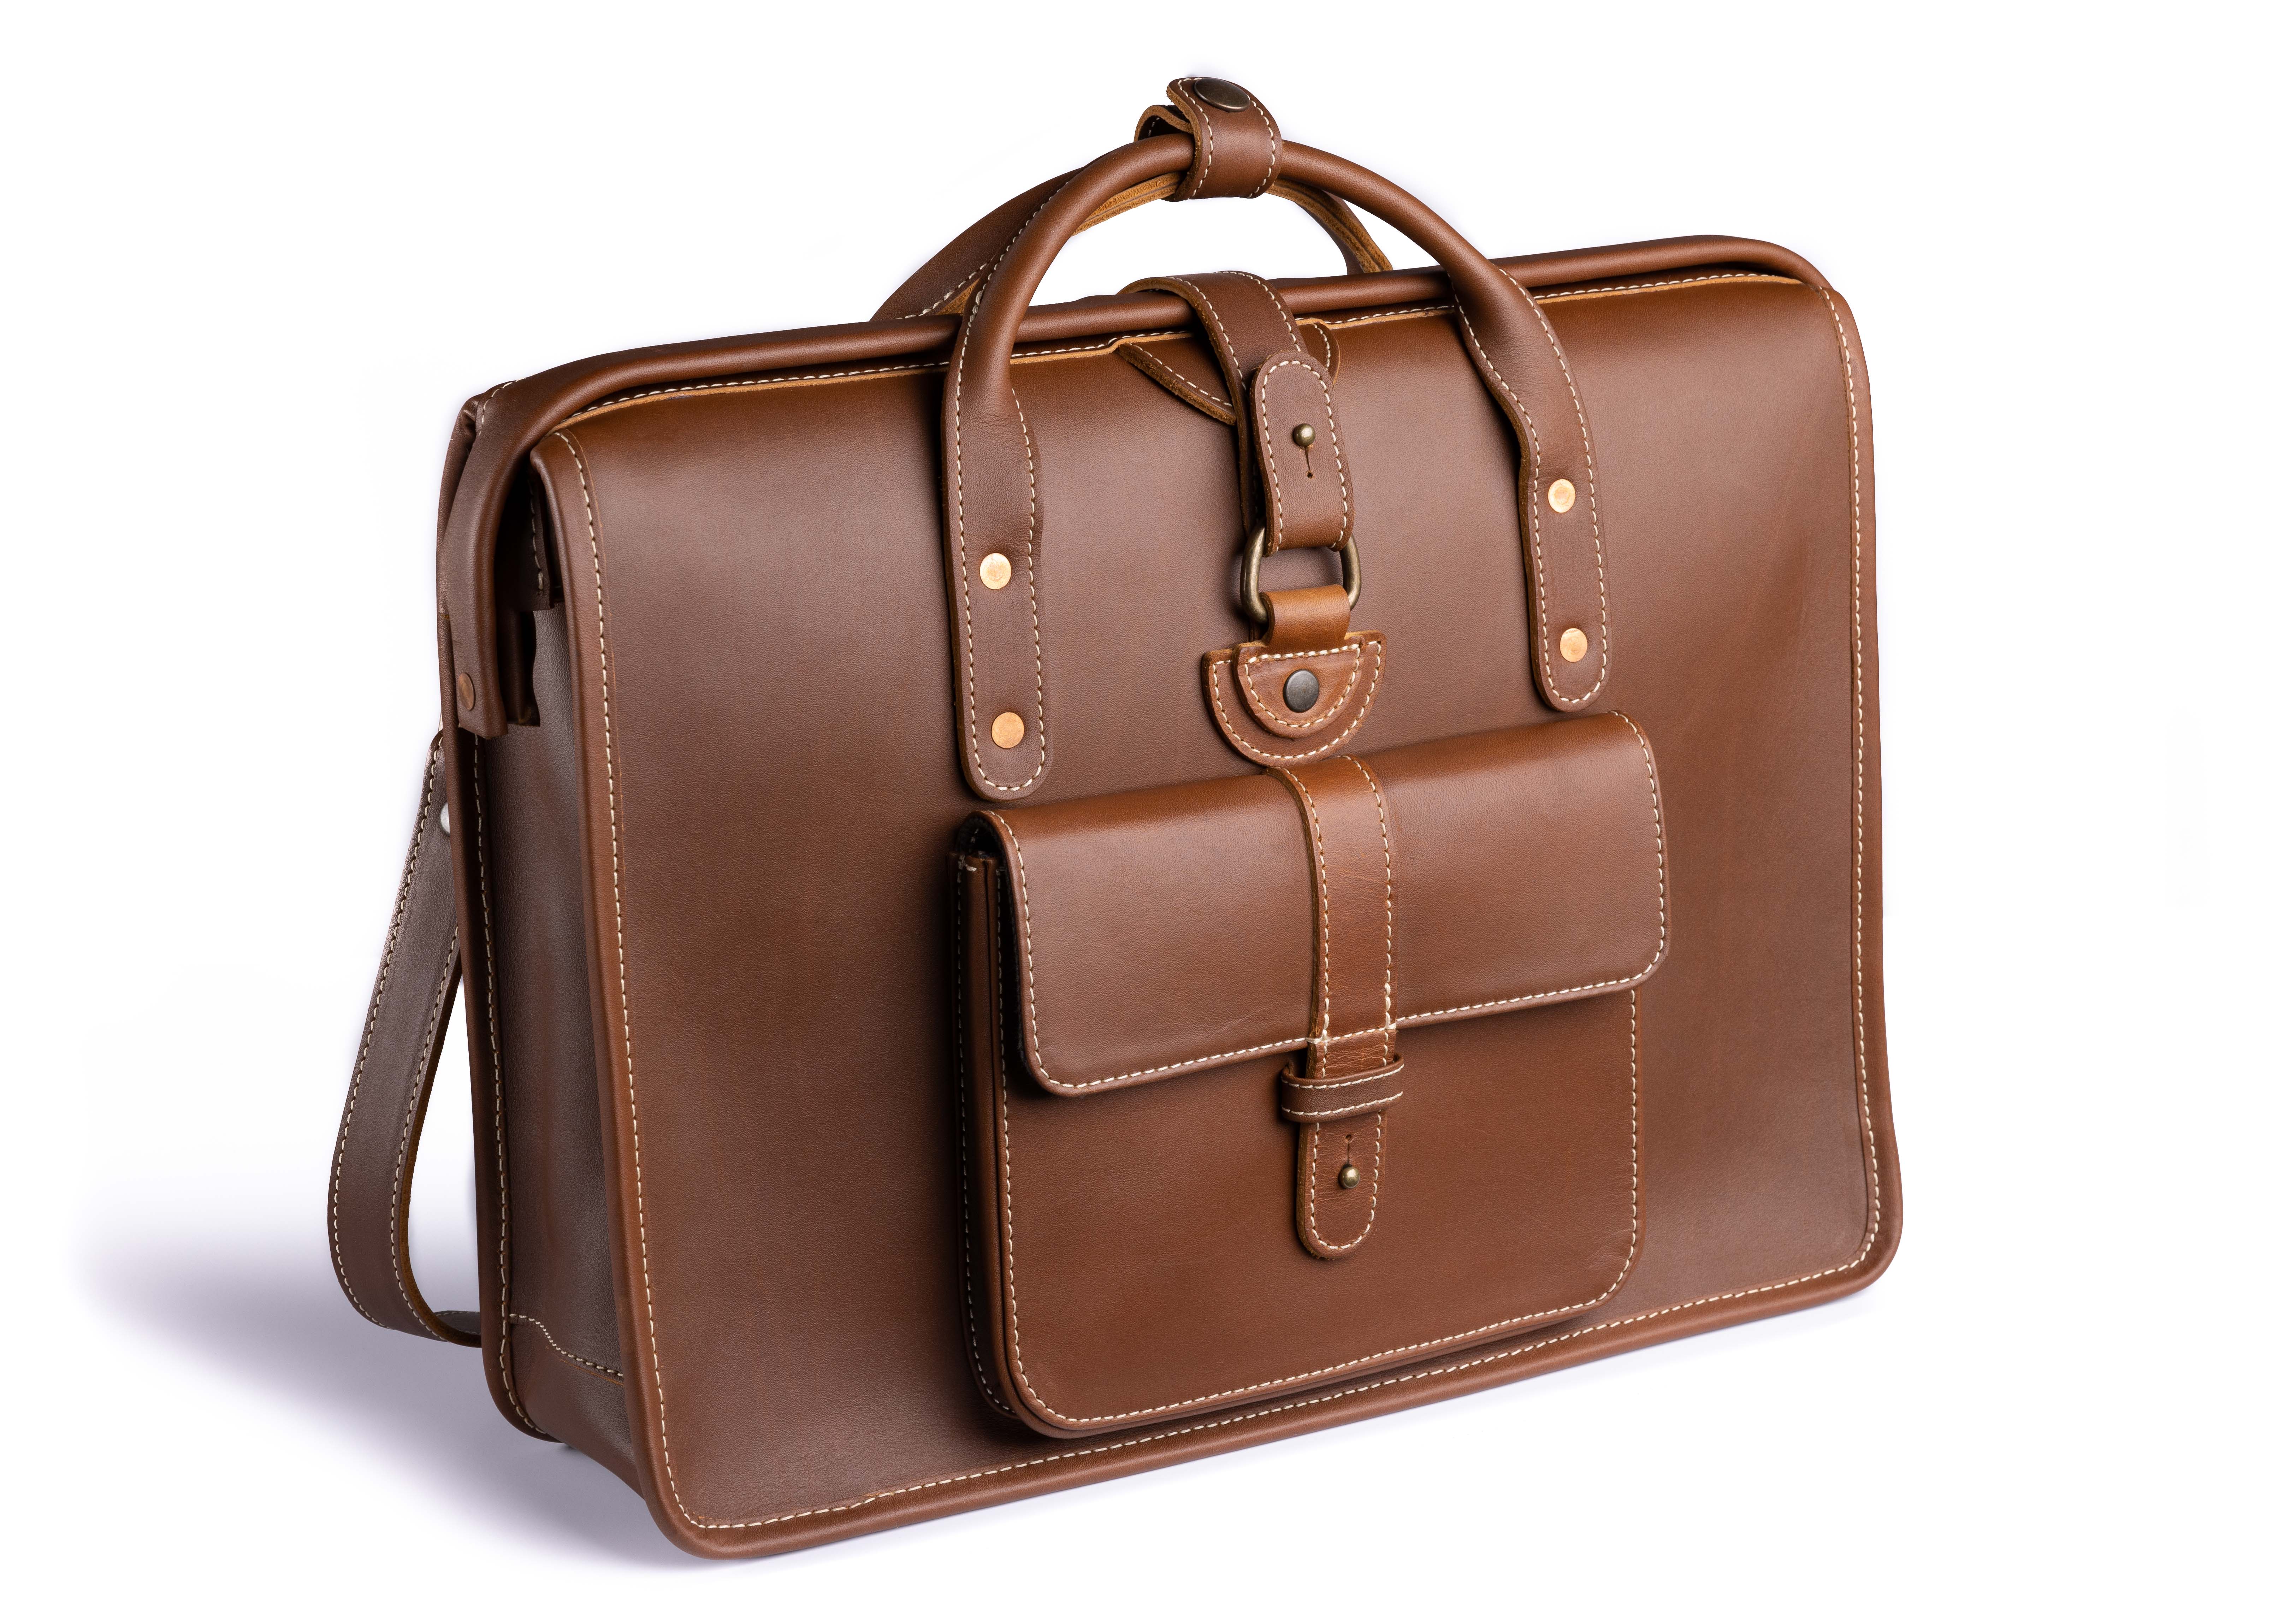 The Pad & Quill Gladstone Briefcase offers plenty of storage in a